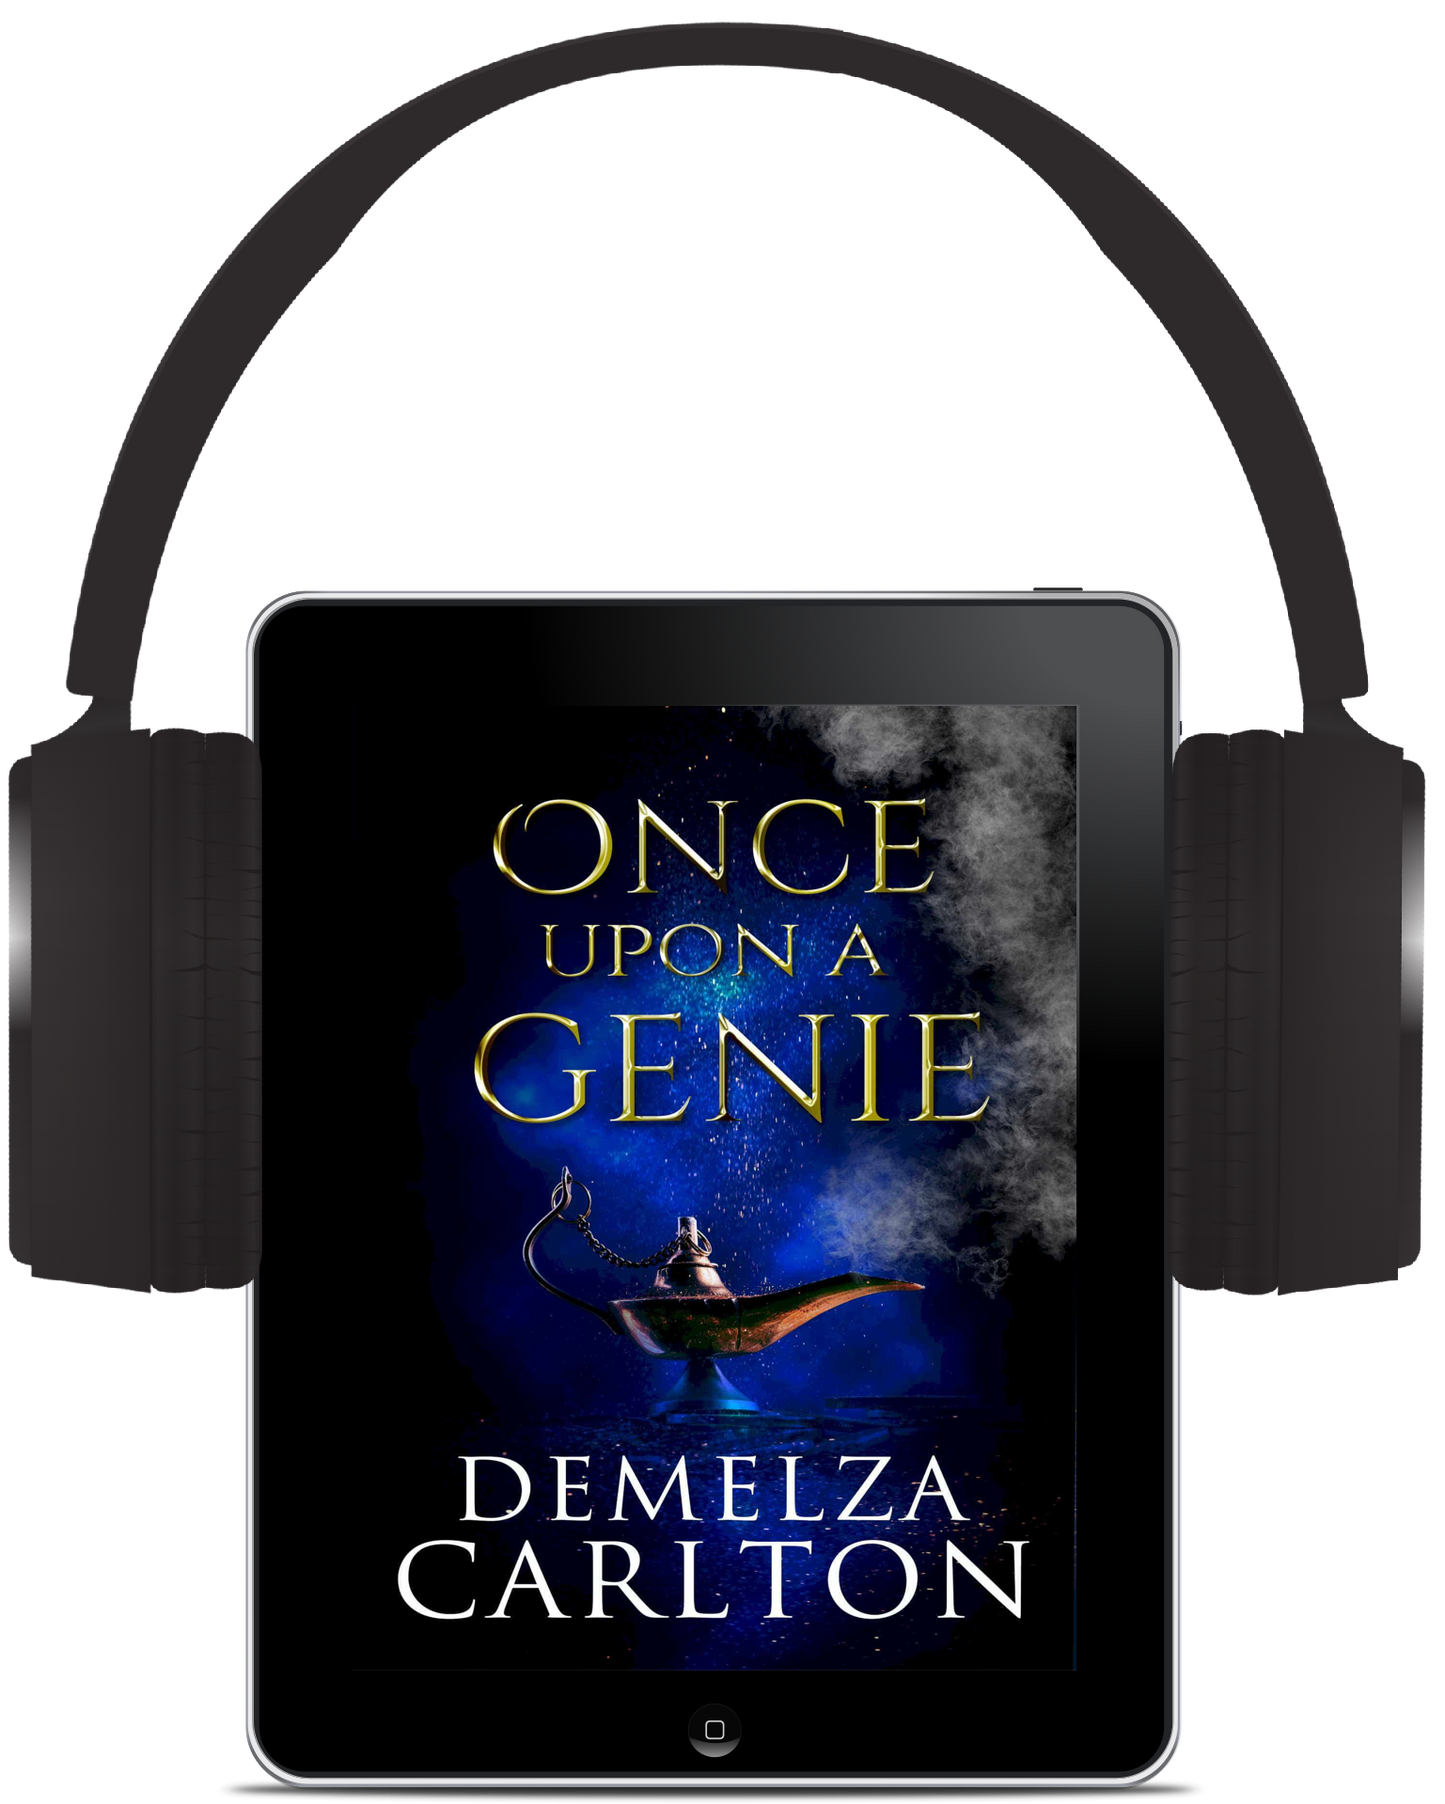 Once Upon a Genie (Book 10-12 in the Romance a Medieval Fairytale series) AUDIOBOOK